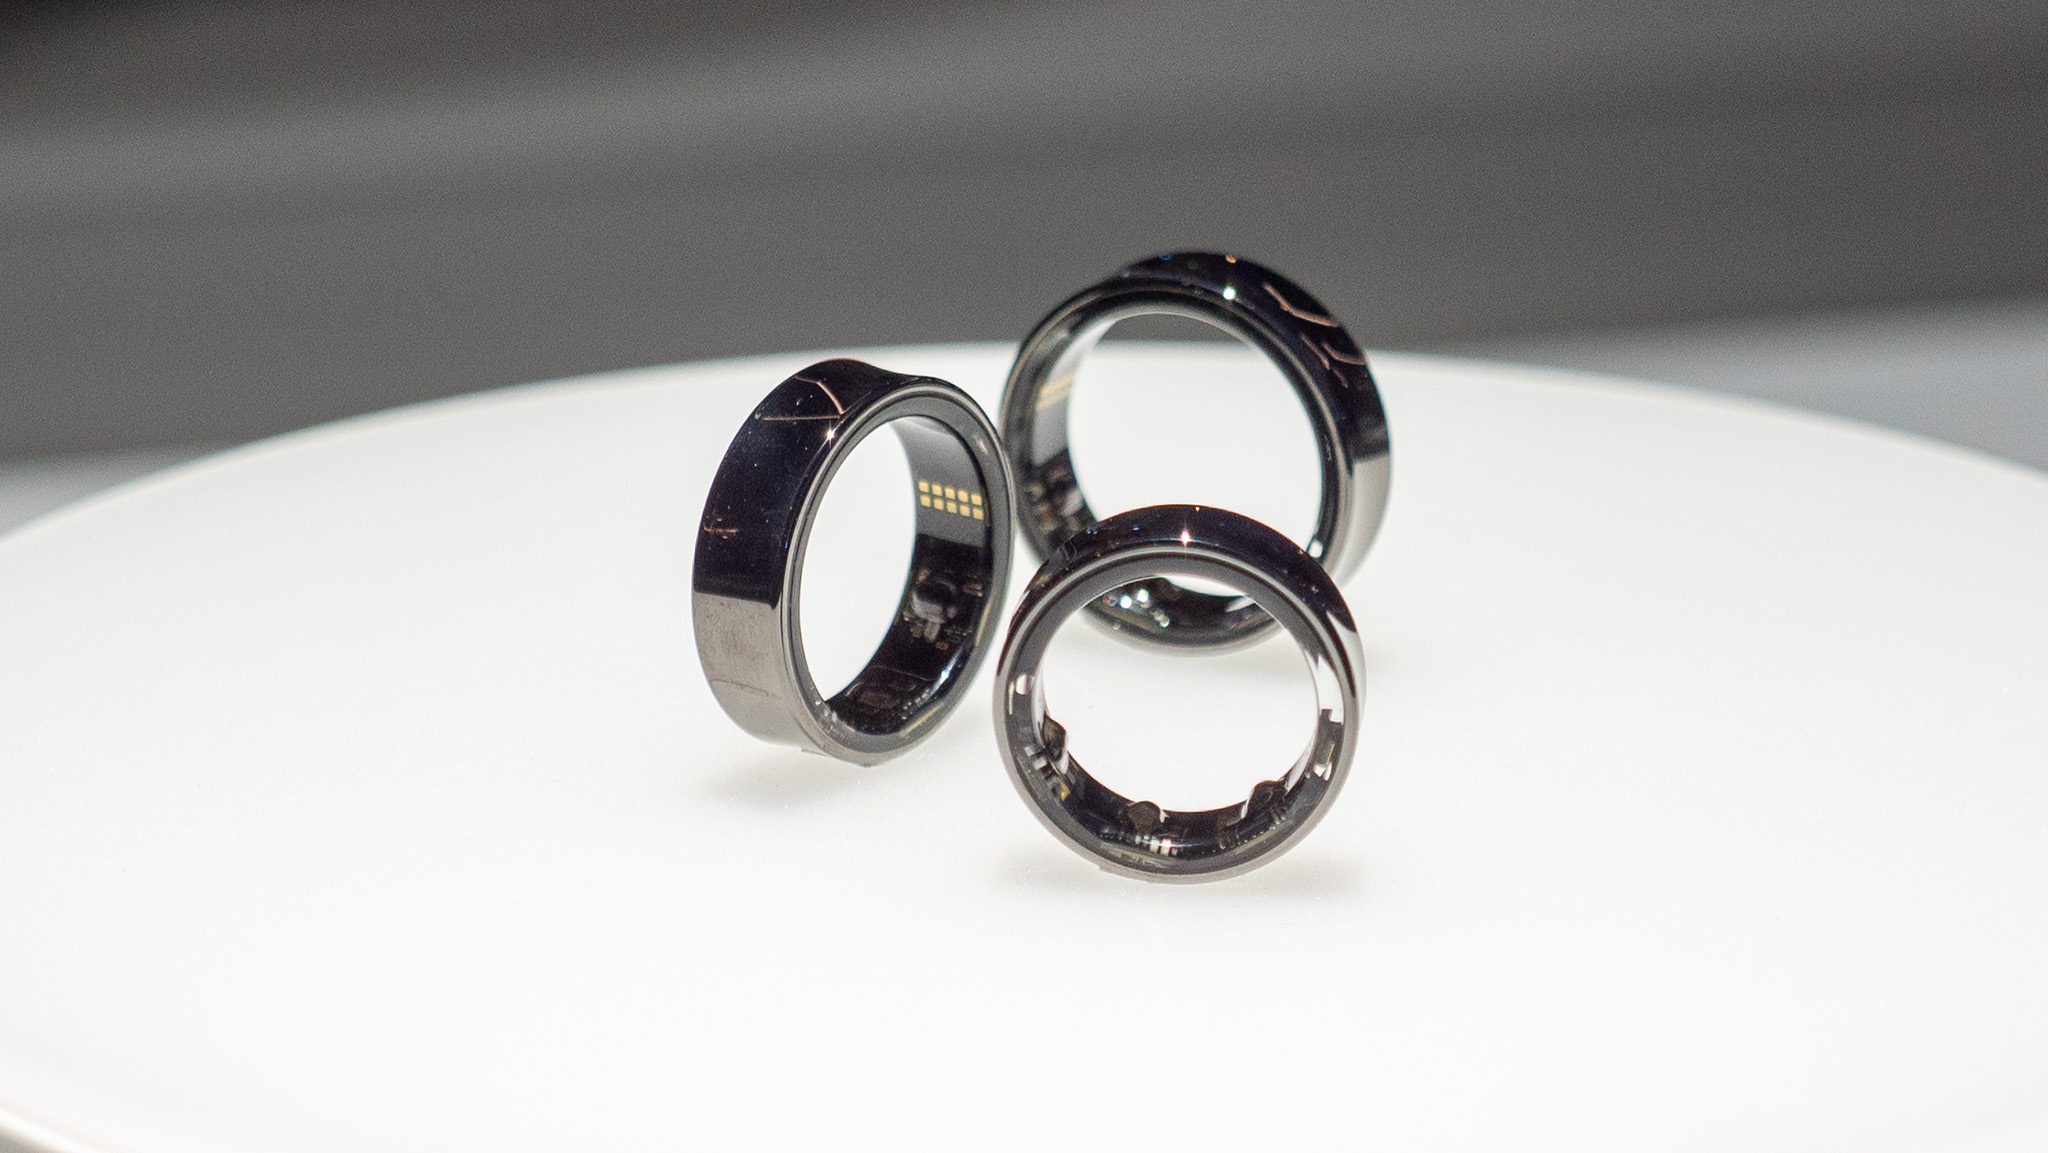 Review: What It's Like to Wear the Oura Smart Ring